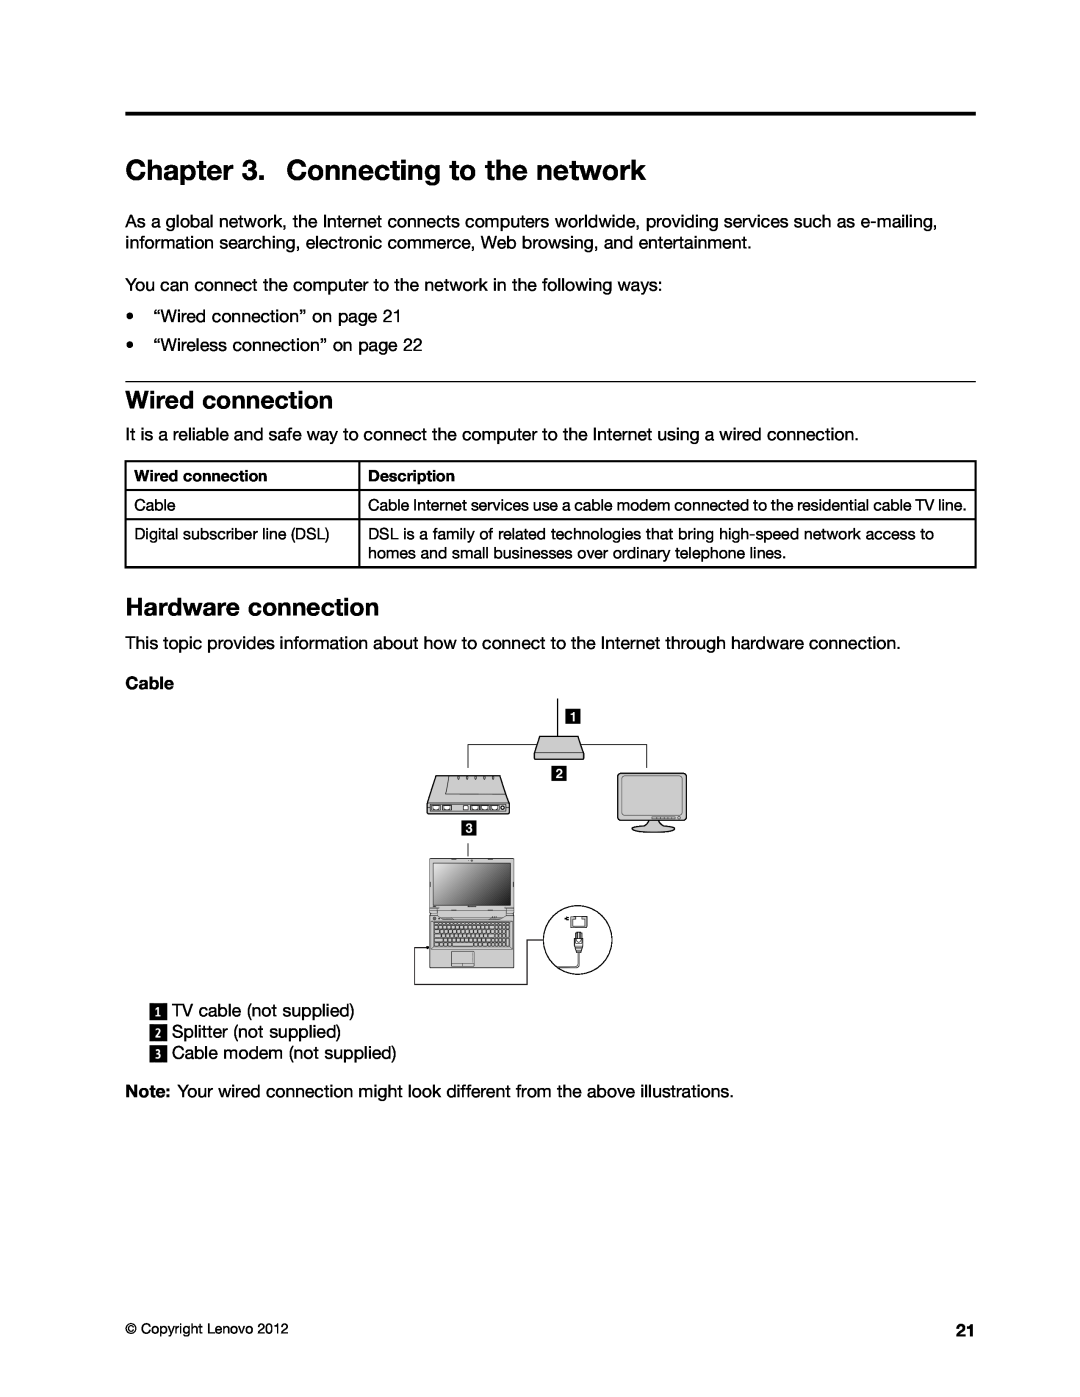 Lenovo 59366616 manual Connecting to the network, Wired connection, Hardware connection, Cable 